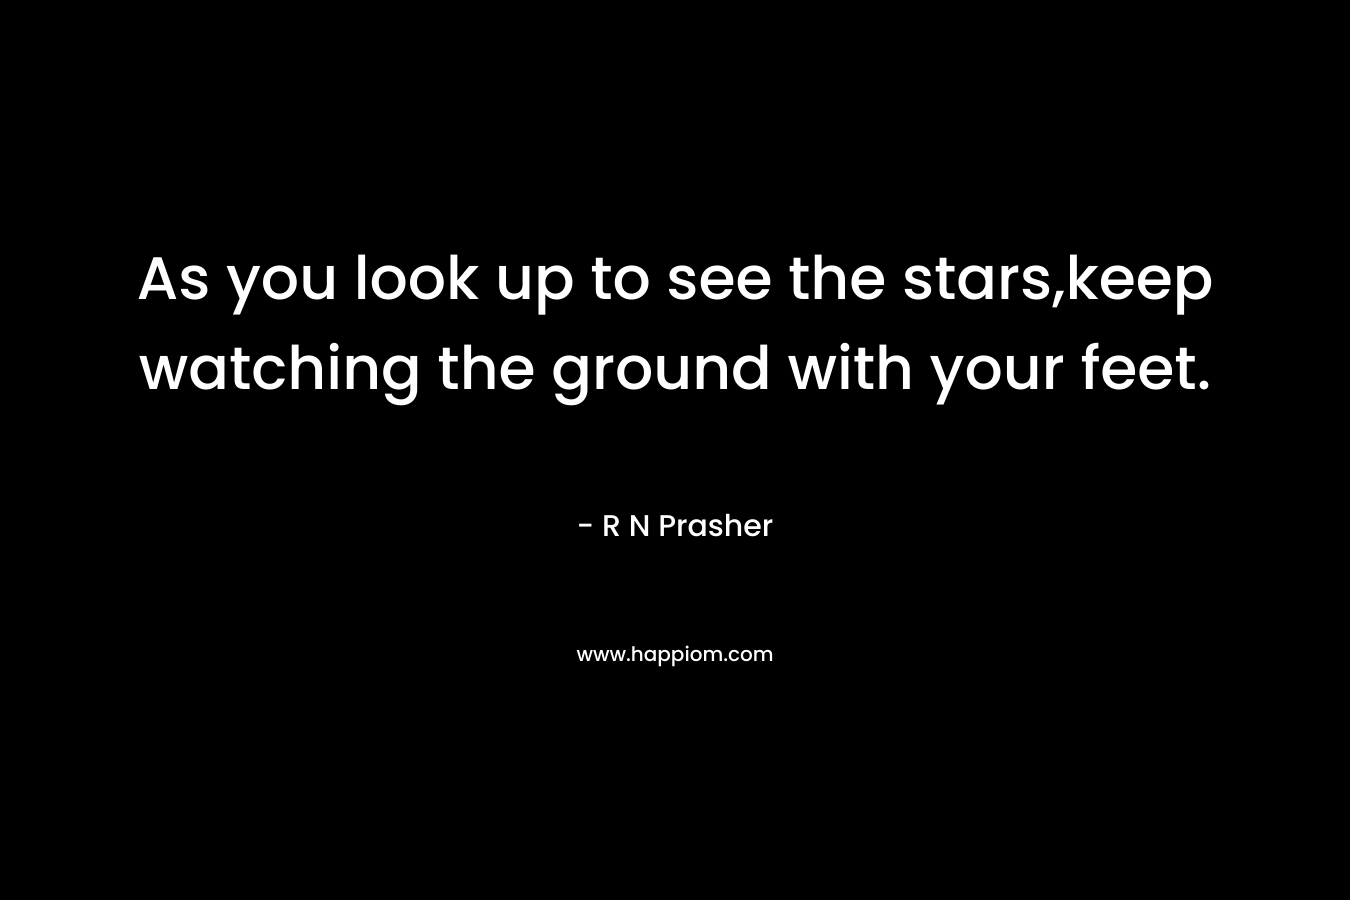 As you look up to see the stars,keep watching the ground with your feet. – R N Prasher